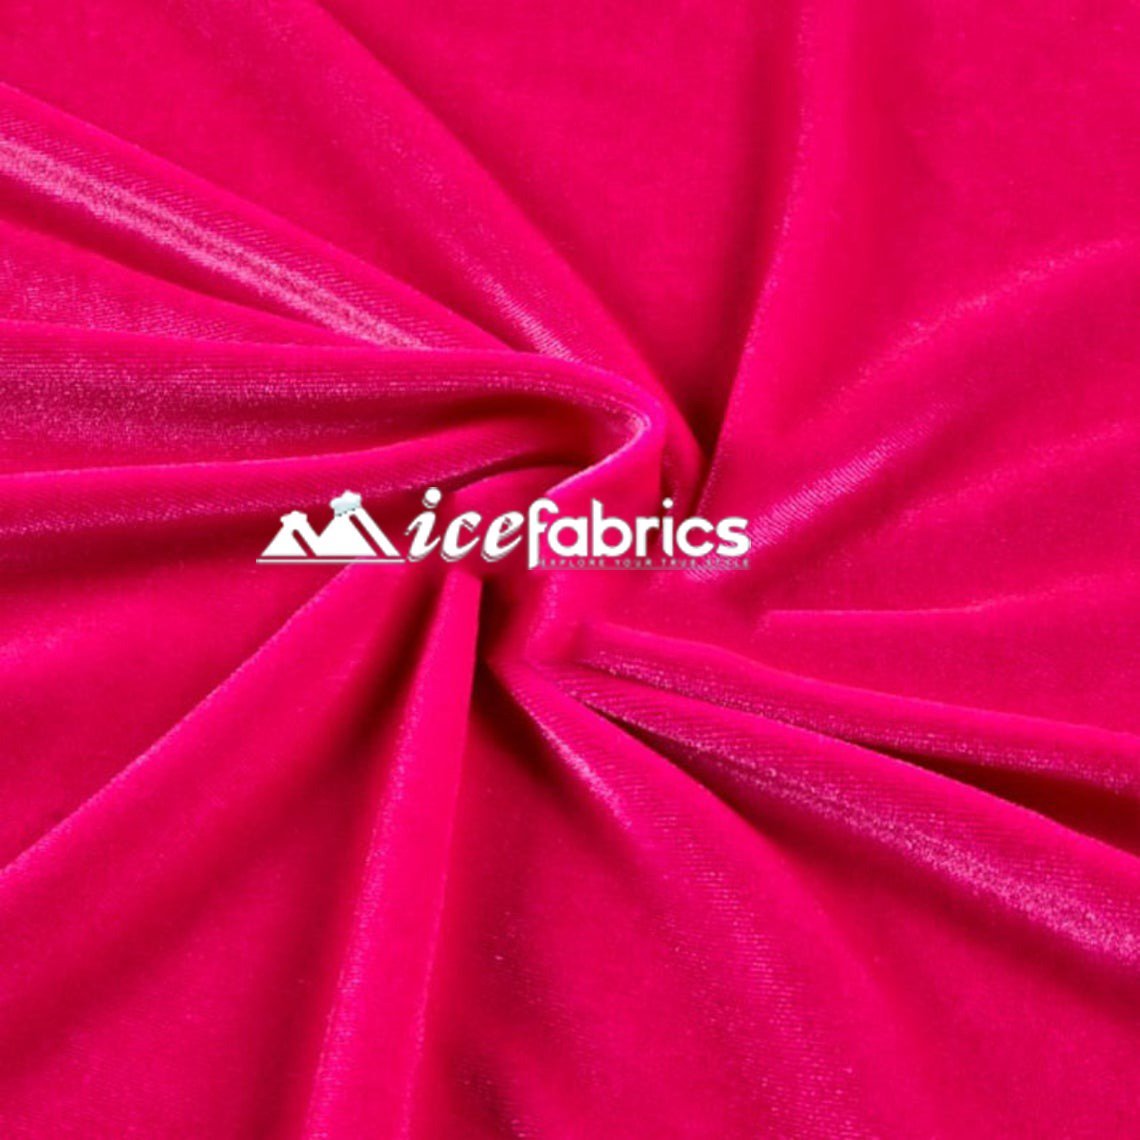 Hight Quality Stretch Velvet Fabric By The Roll (20 yards) Wholesale FabricVelvet FabricICE FABRICSICE FABRICSHot PinkBy The Roll (60" Wide)Hight Quality Stretch Velvet Fabric By The Roll (20 yards) Wholesale Fabric ICE FABRICS Hot Pink